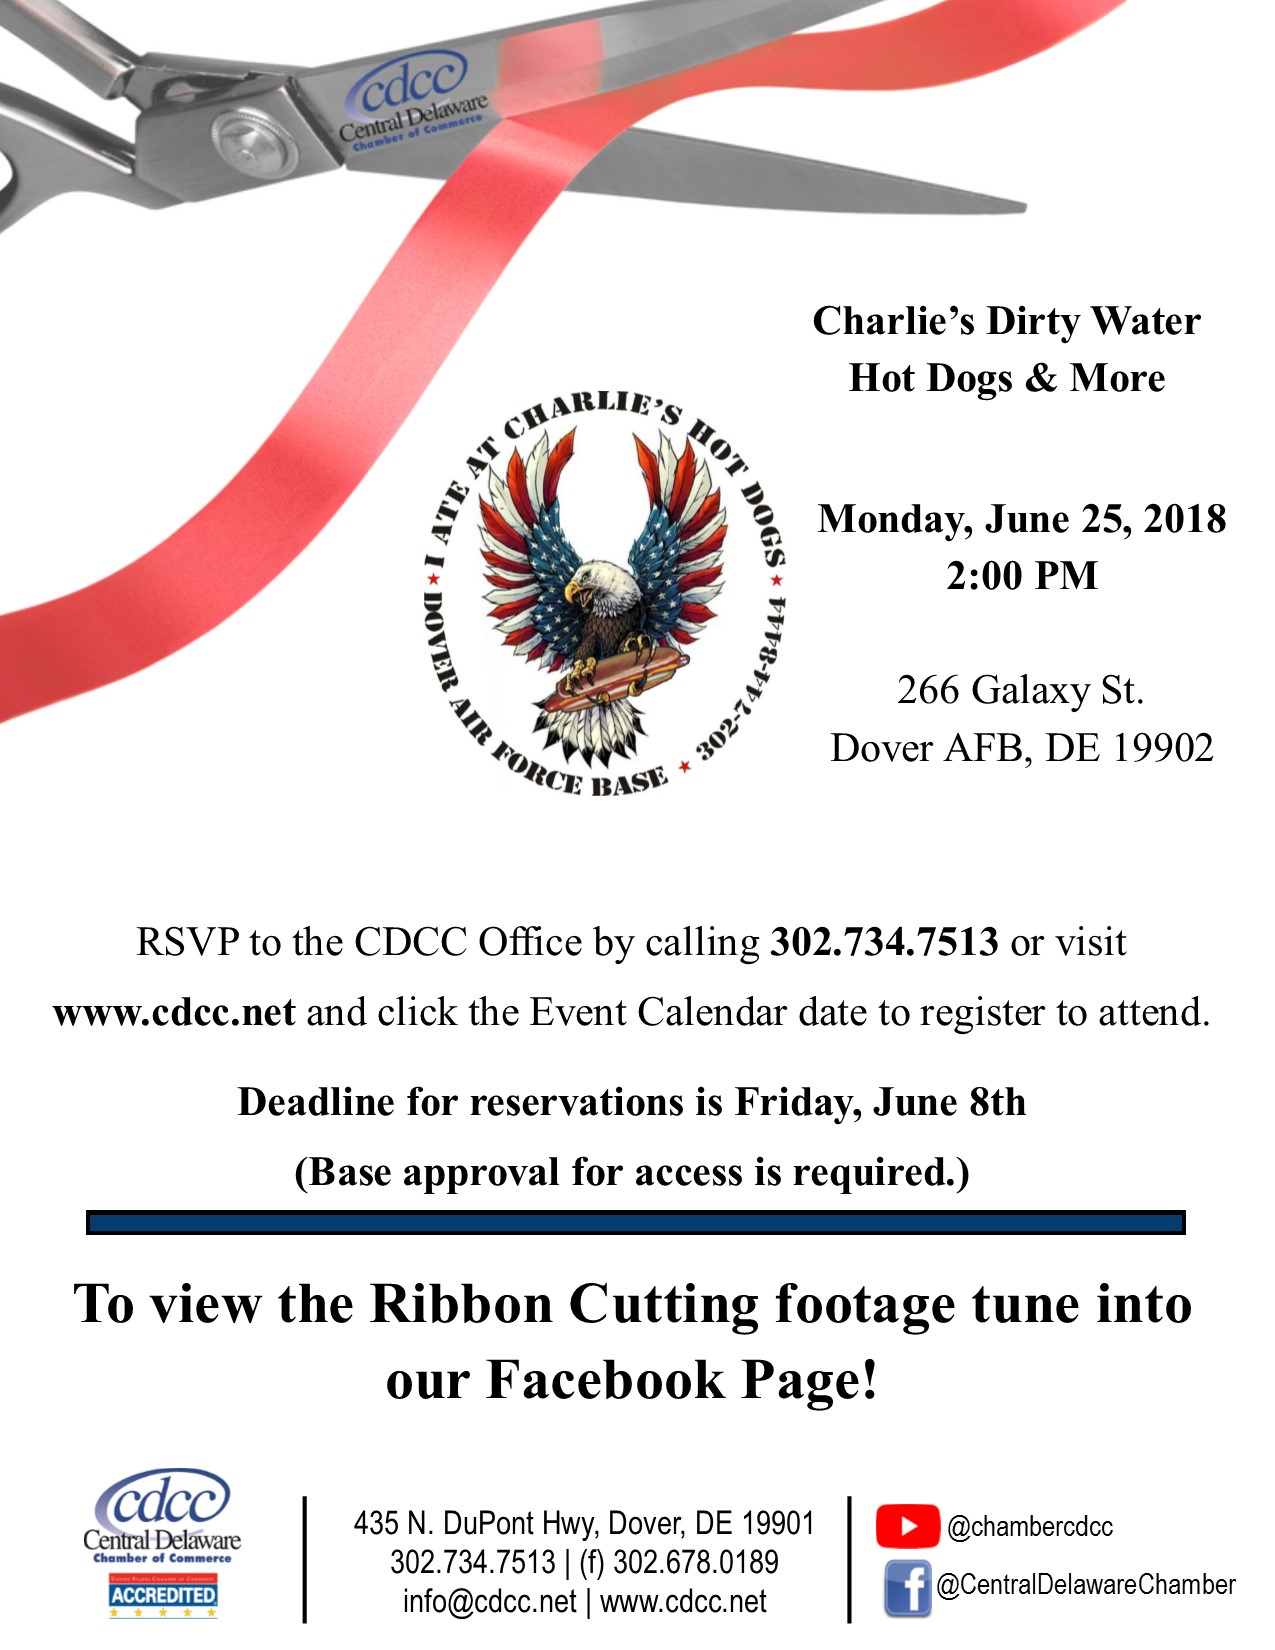 Ribbon Cutting - Charlie's Dirty Water Hot Dogs & More